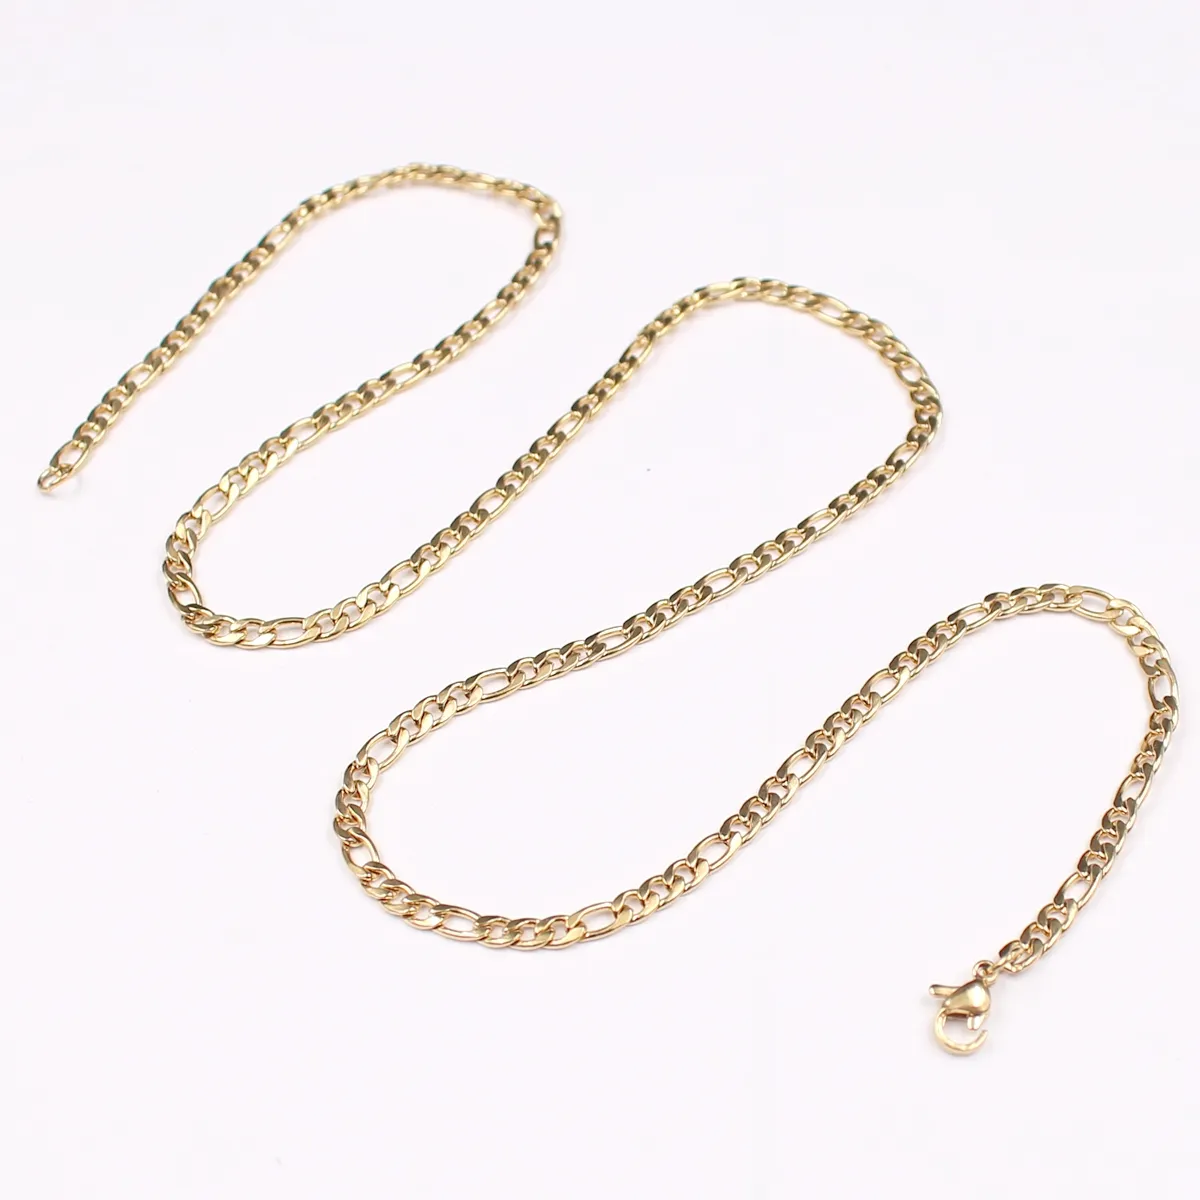 5pcs lot in bulk gold stainless steel Fashion Figaro NK Chain link necklace thin jewelry for women men gifts246p